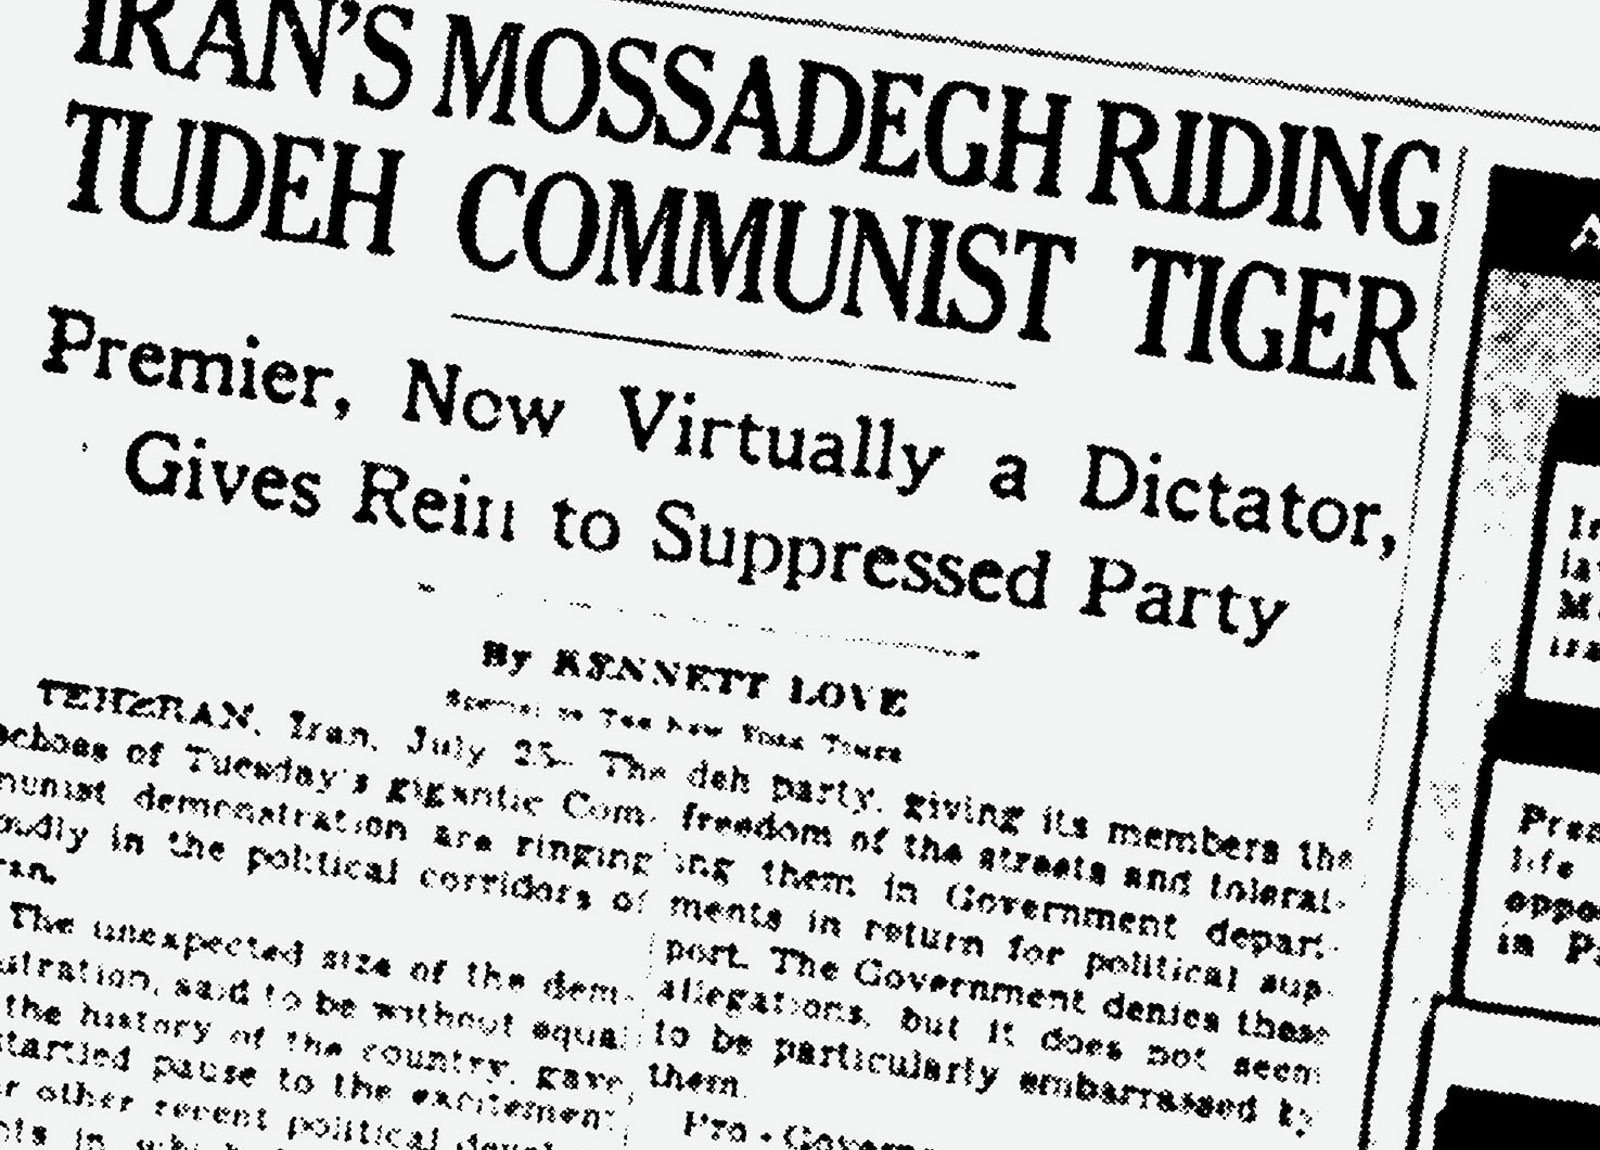 Illustration:
A New York Times article, from a 1953 paper, is blown up so that it extends beyond the edges of the frame. The headline reads: “Iran’s Mossadegh Riding Tudeh Communist Tiger.”